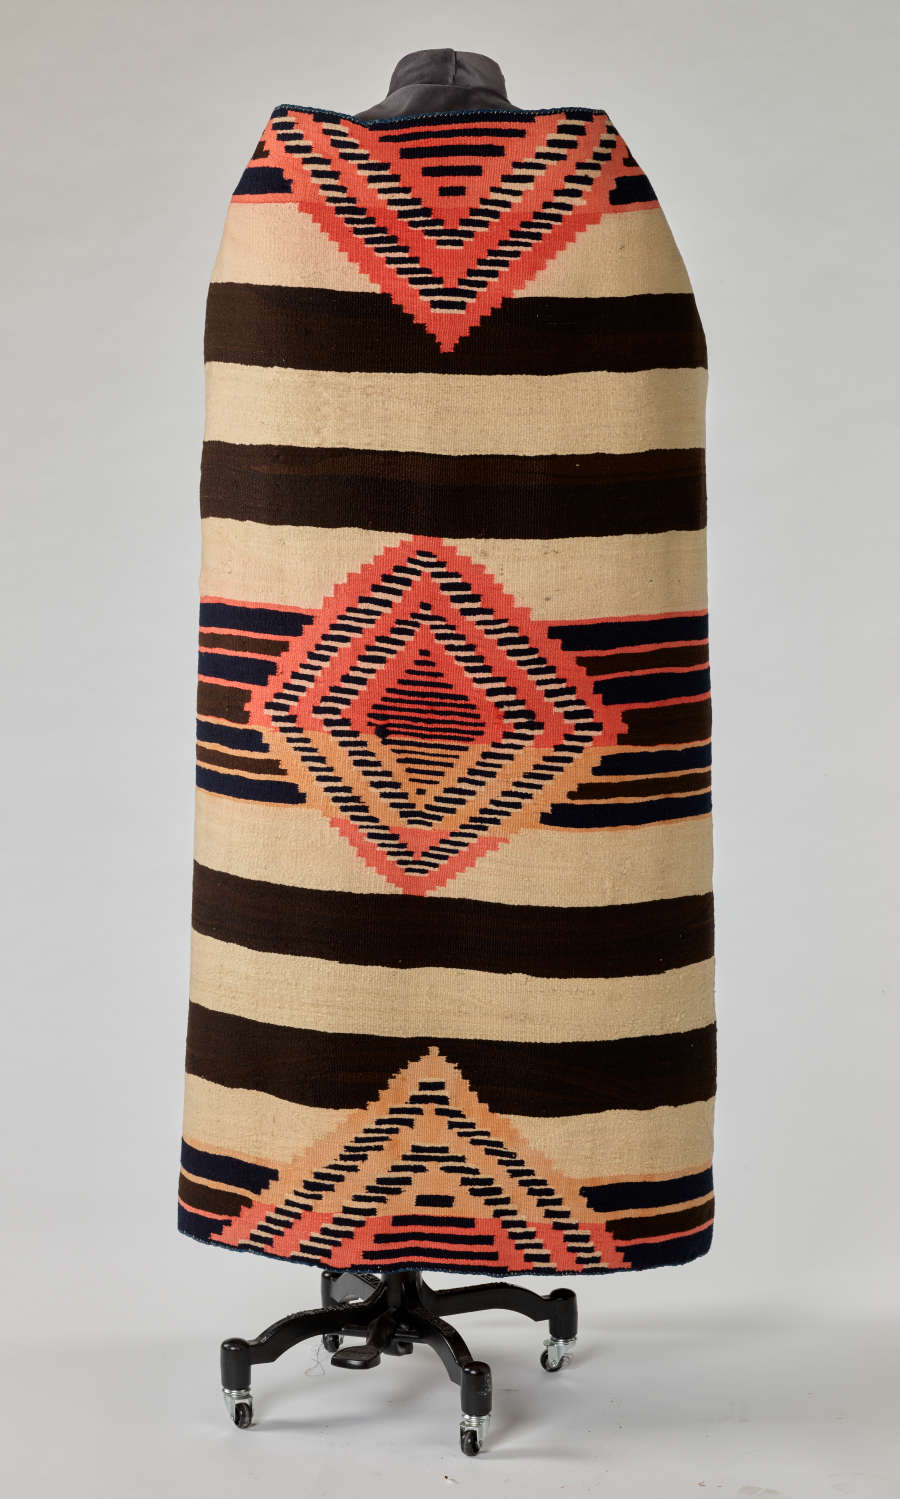 Back of a black and cream striped woven blanket with pink and yellow geometric patterns. The blanket has a stiff quality, creating an upright collar when draped around a mannequin.